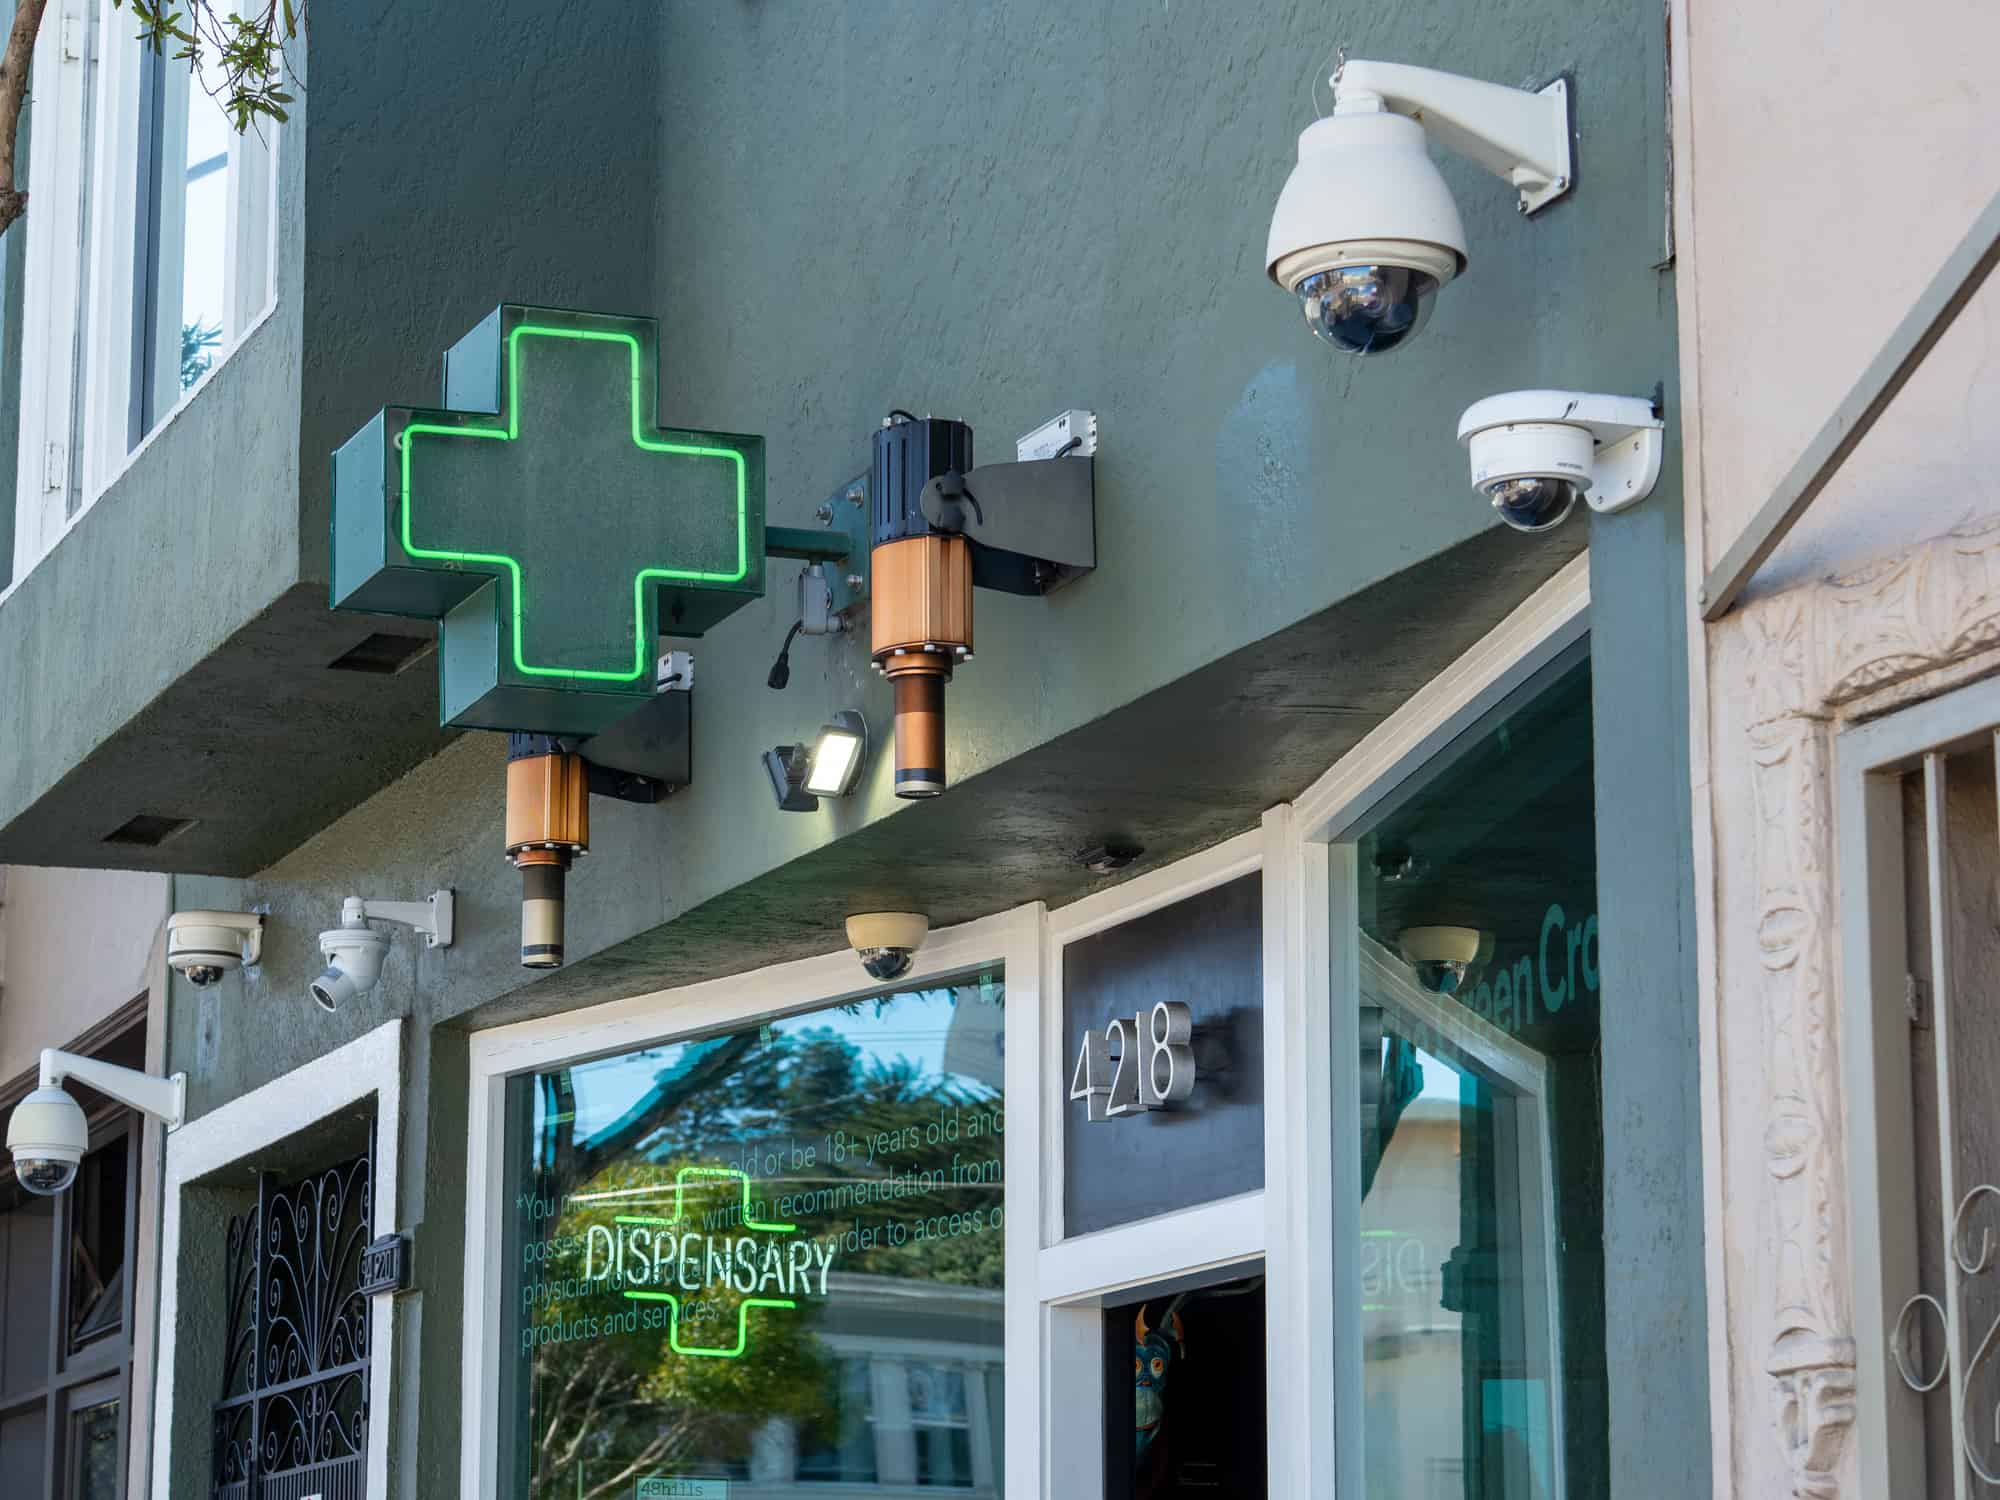 Is California’s Legal Marijuana Dispensary Industry at Risk of Collapsing?